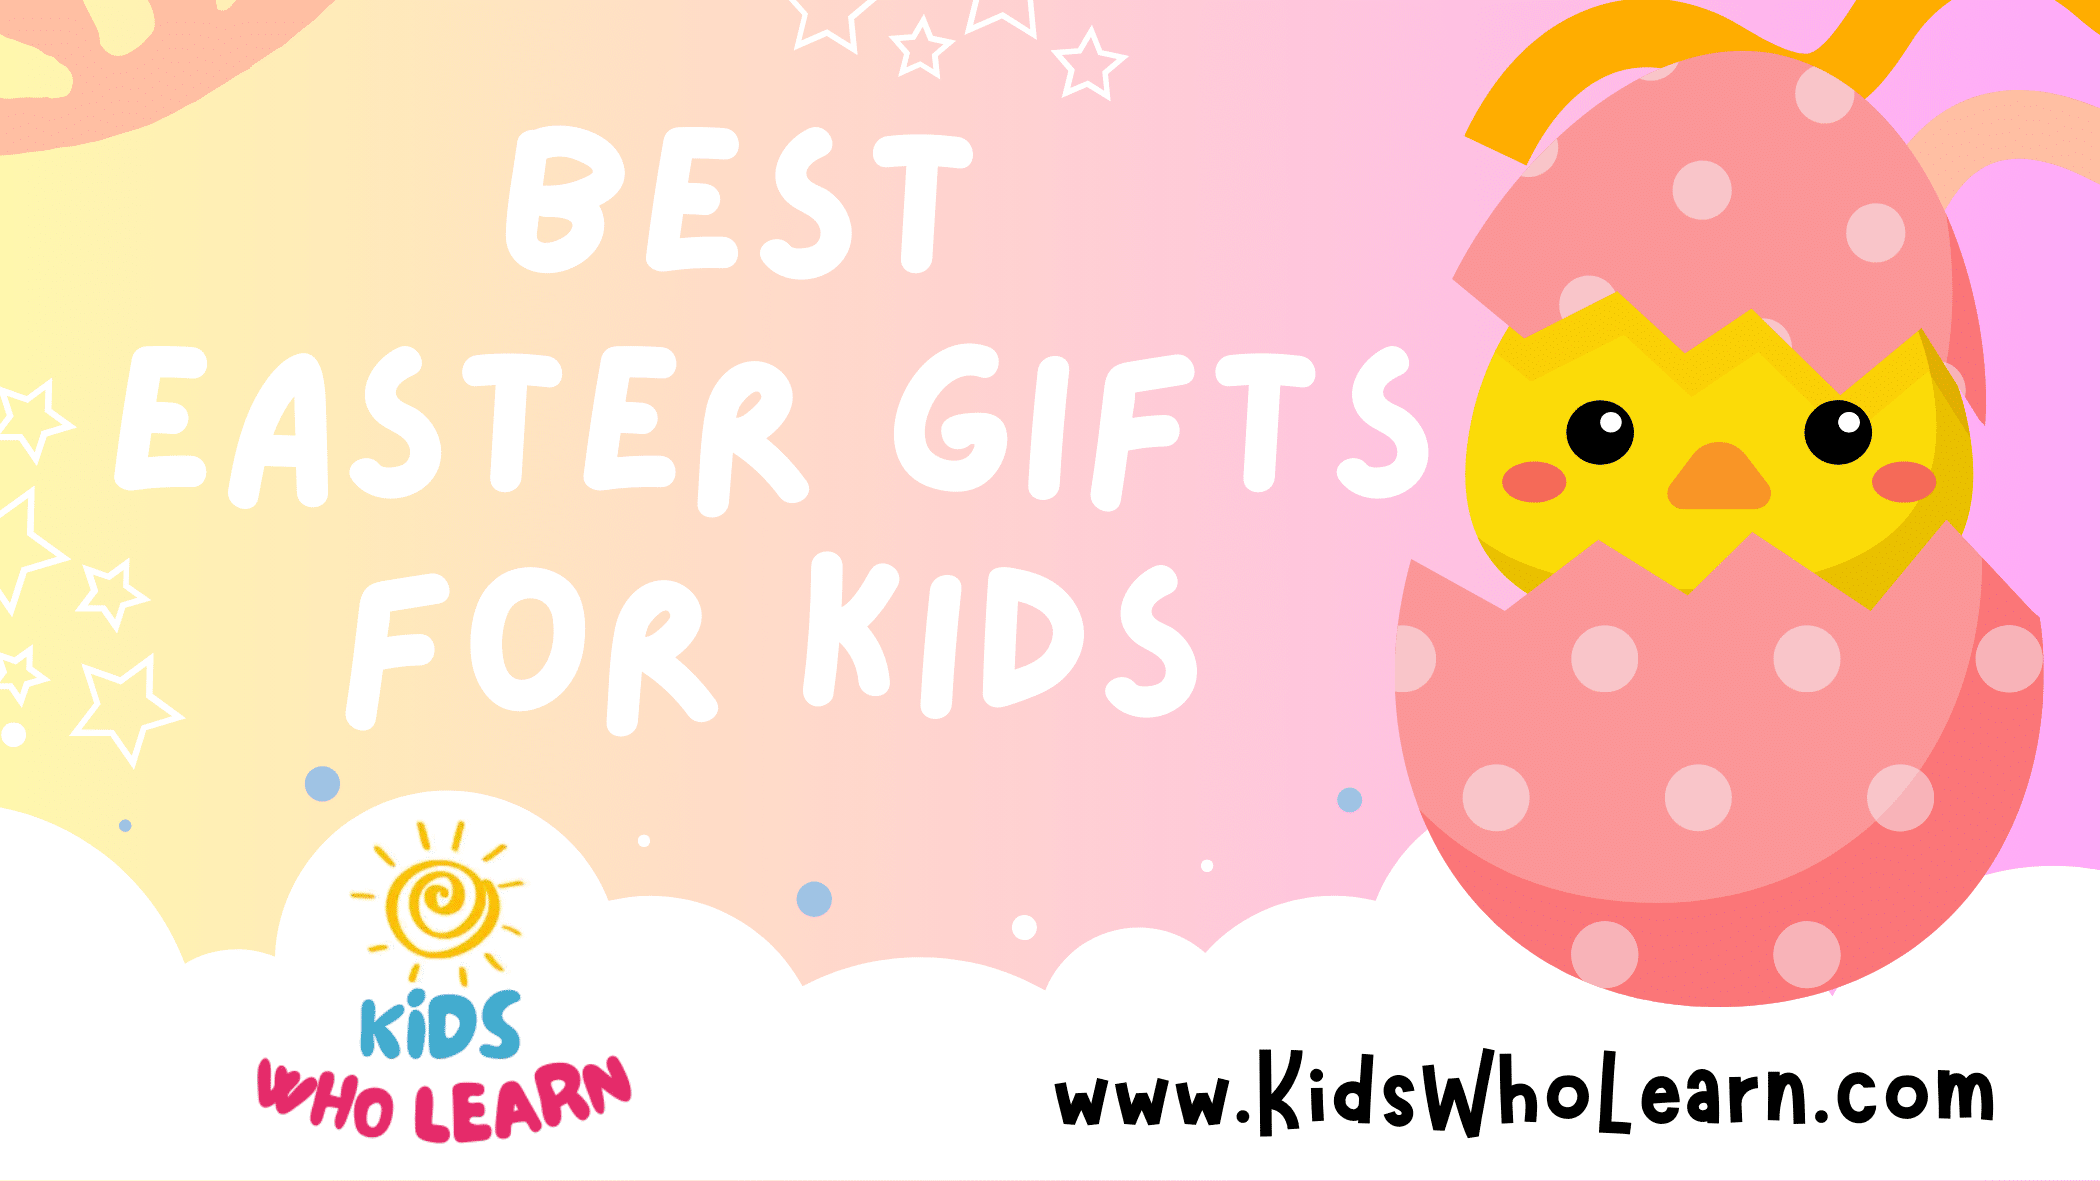 The Best Easter Gifts for Kids: for a Memorable Holiday